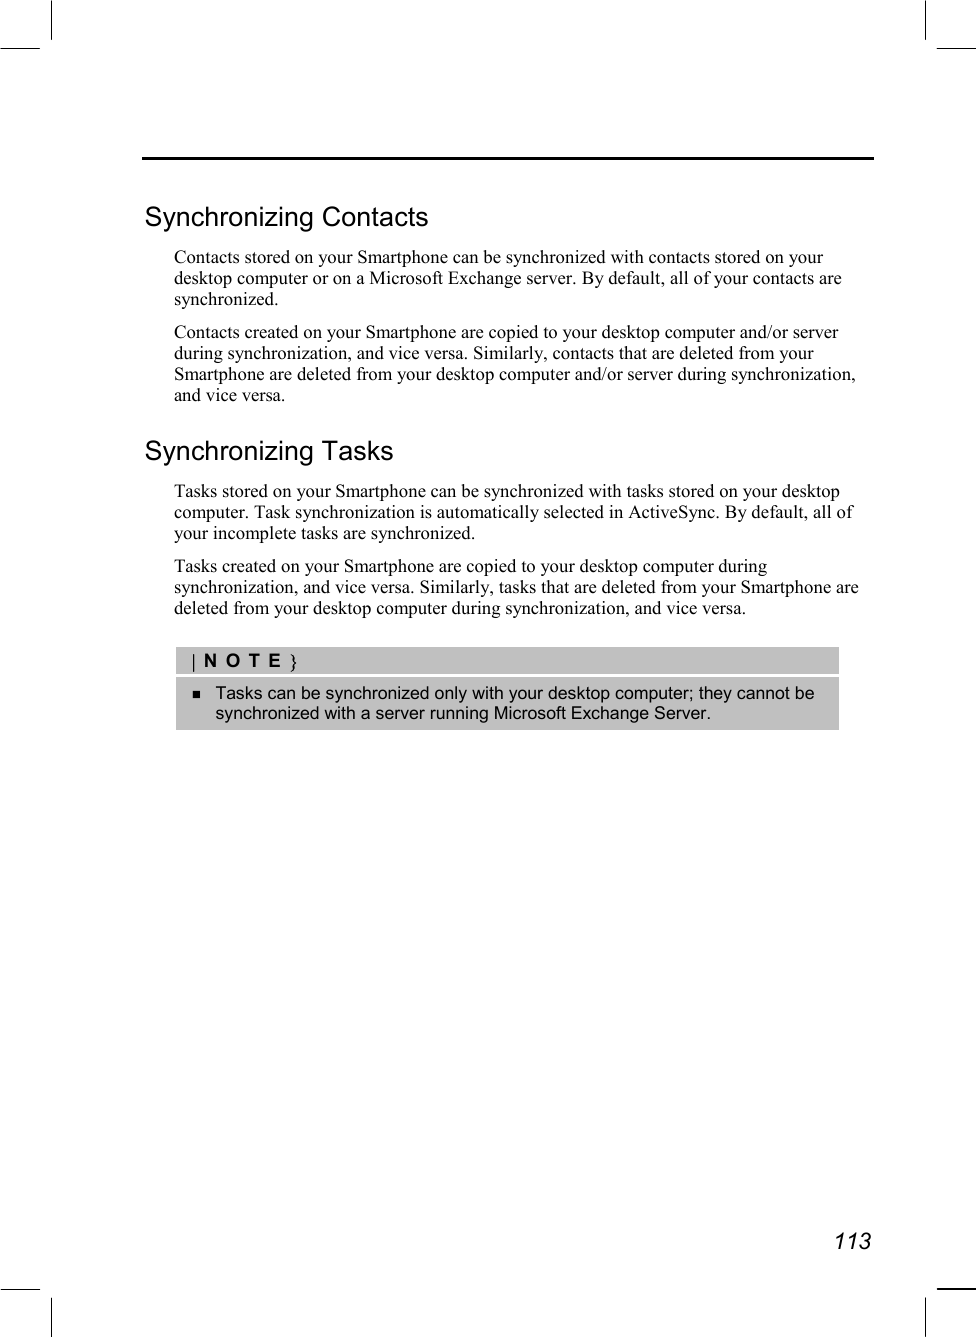   113  Synchronizing Contacts Contacts stored on your Smartphone can be synchronized with contacts stored on your desktop computer or on a Microsoft Exchange server. By default, all of your contacts are synchronized. Contacts created on your Smartphone are copied to your desktop computer and/or server during synchronization, and vice versa. Similarly, contacts that are deleted from your Smartphone are deleted from your desktop computer and/or server during synchronization, and vice versa. Synchronizing Tasks Tasks stored on your Smartphone can be synchronized with tasks stored on your desktop computer. Task synchronization is automatically selected in ActiveSync. By default, all of your incomplete tasks are synchronized. Tasks created on your Smartphone are copied to your desktop computer during synchronization, and vice versa. Similarly, tasks that are deleted from your Smartphone are deleted from your desktop computer during synchronization, and vice versa.  |NOTE}   Tasks can be synchronized only with your desktop computer; they cannot be synchronized with a server running Microsoft Exchange Server. 